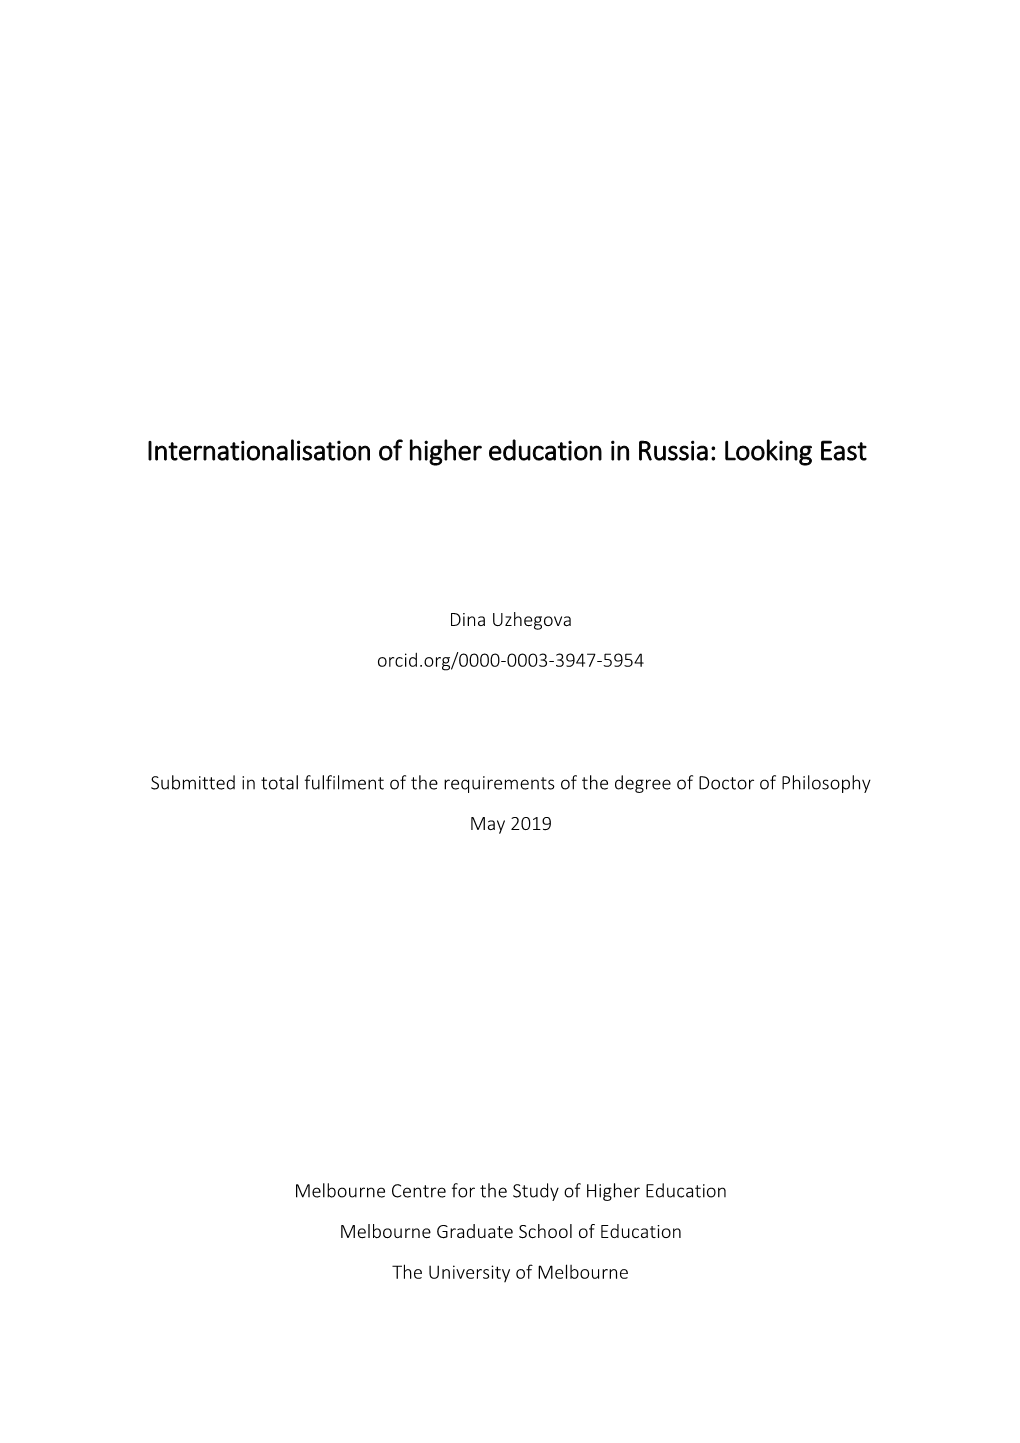 Internationalsiaiton of Higher Education in Russia